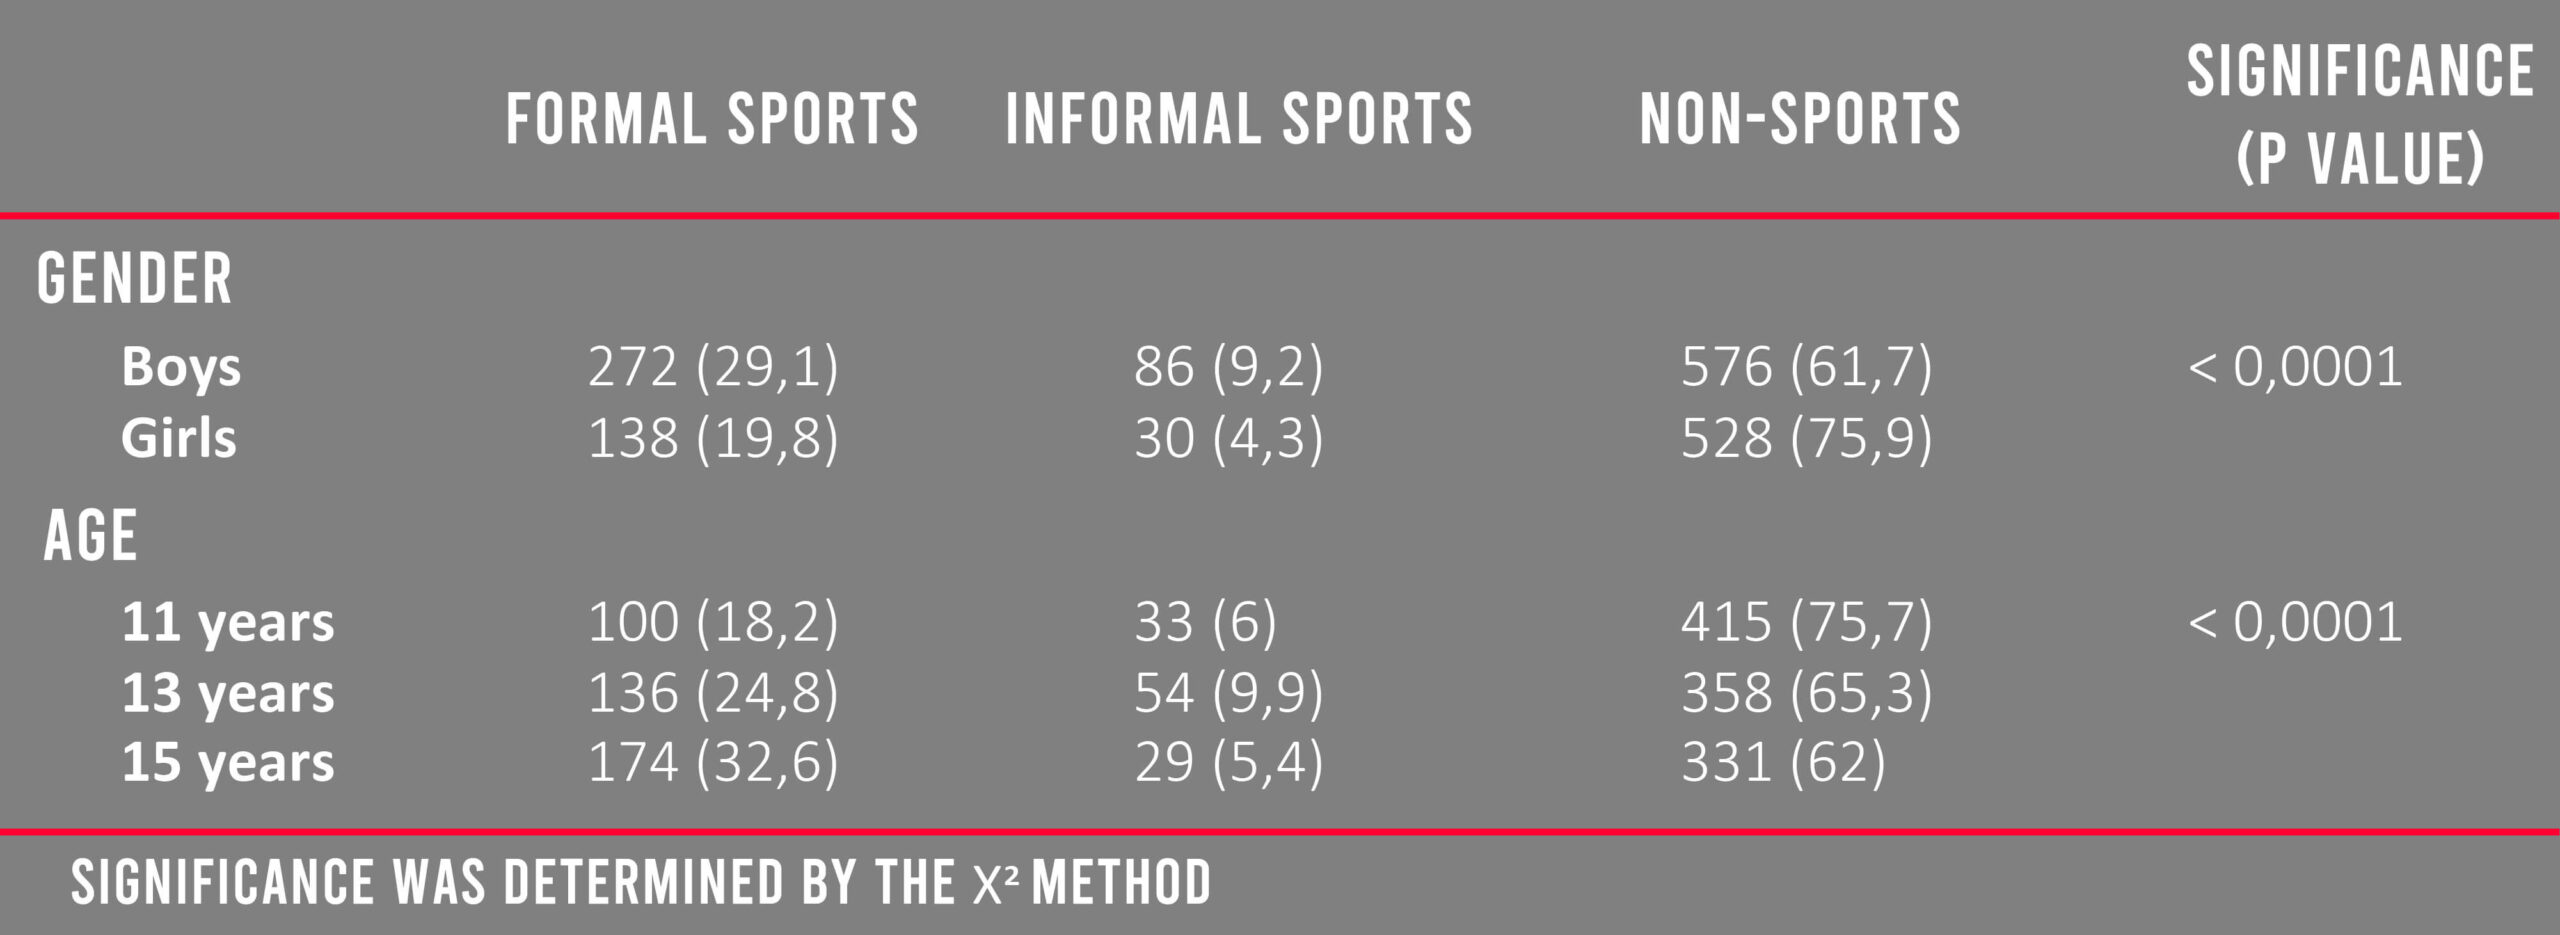 Statistics of sports injuries by sex